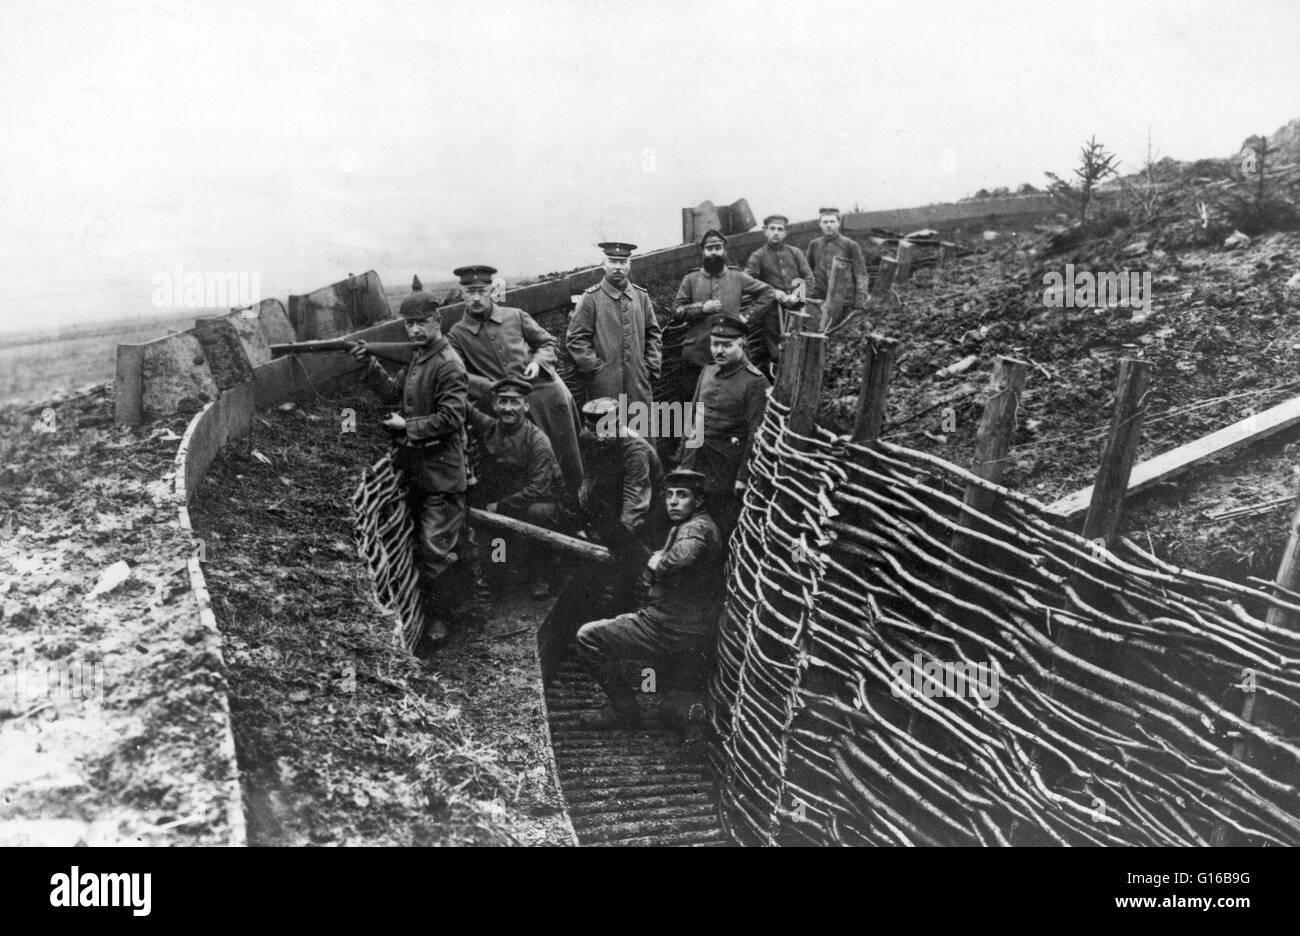 German military personel in a trench. Trench warfare is a form of land warfare using occupied fighting lines consisting largely of trenches, in which troops are significantly protected from the enemy's small arms fire and are substantially sheltered from Stock Photo